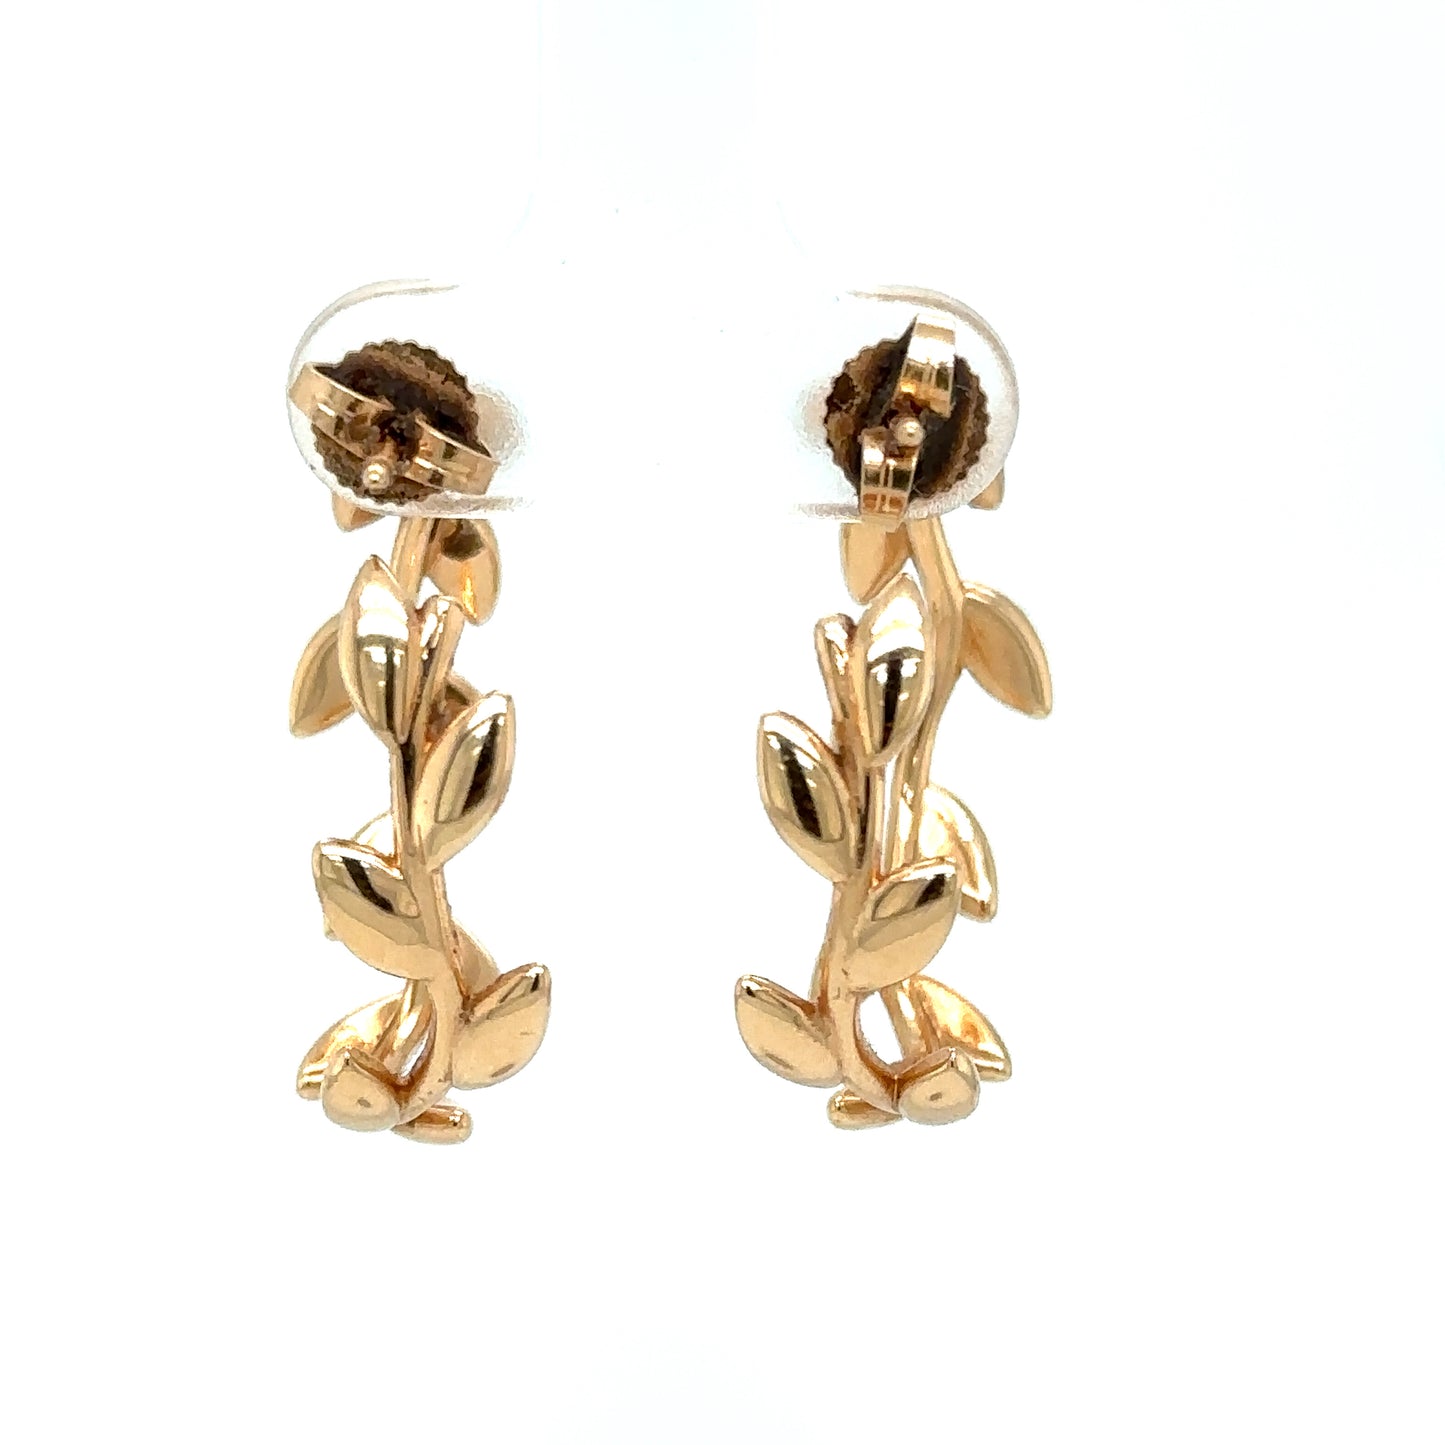 Tiffany & Co. Paloma Picasso Olive Leaf Hoop Earrings in 18K Gold